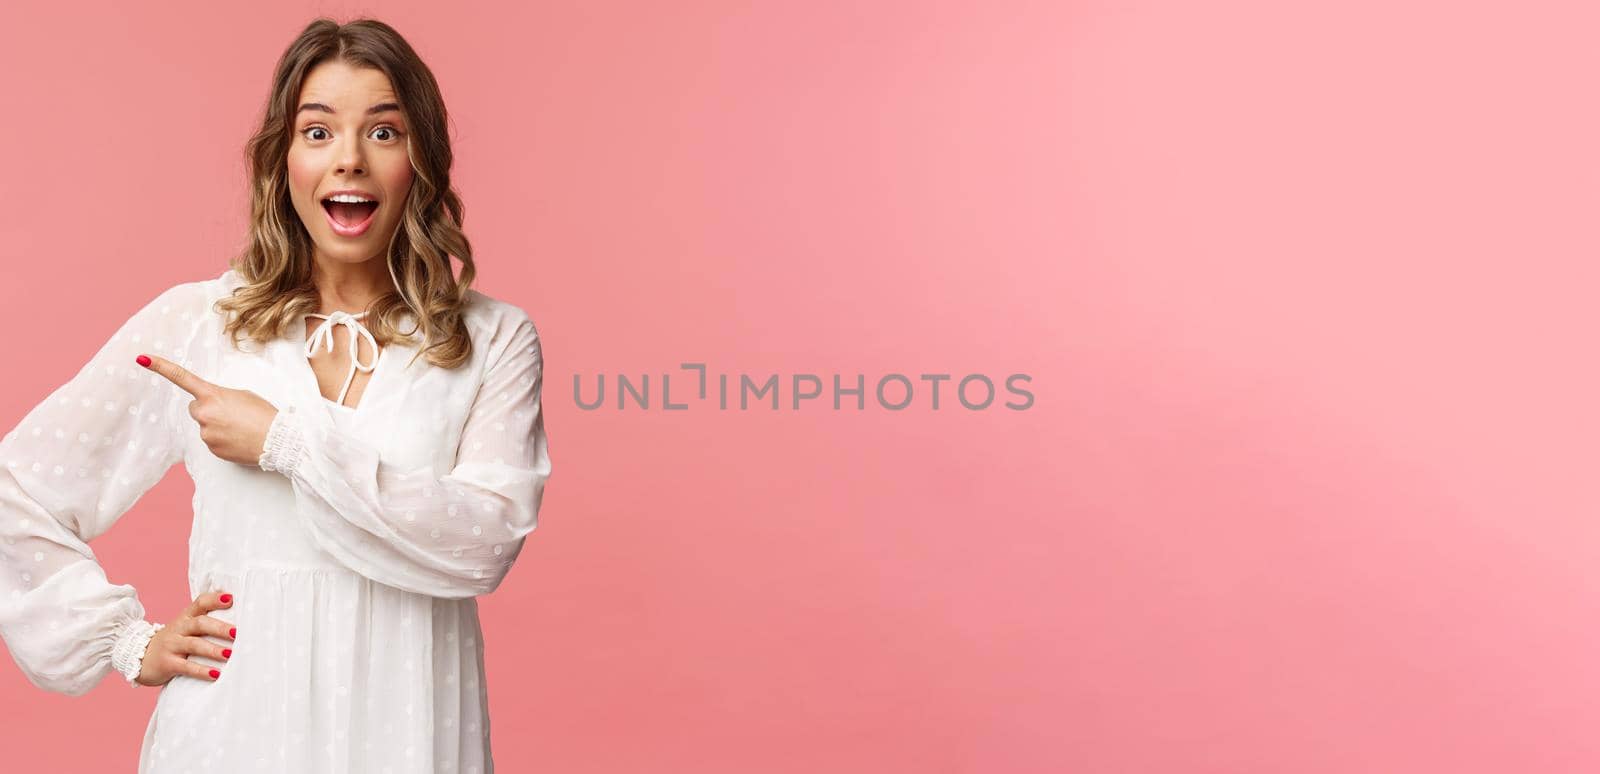 Excited and amused, intrigued blond european girl in white cute spring dress, open mouth wondered and amazed of hearing awesome news, pointing finger left at something cool, pink background.